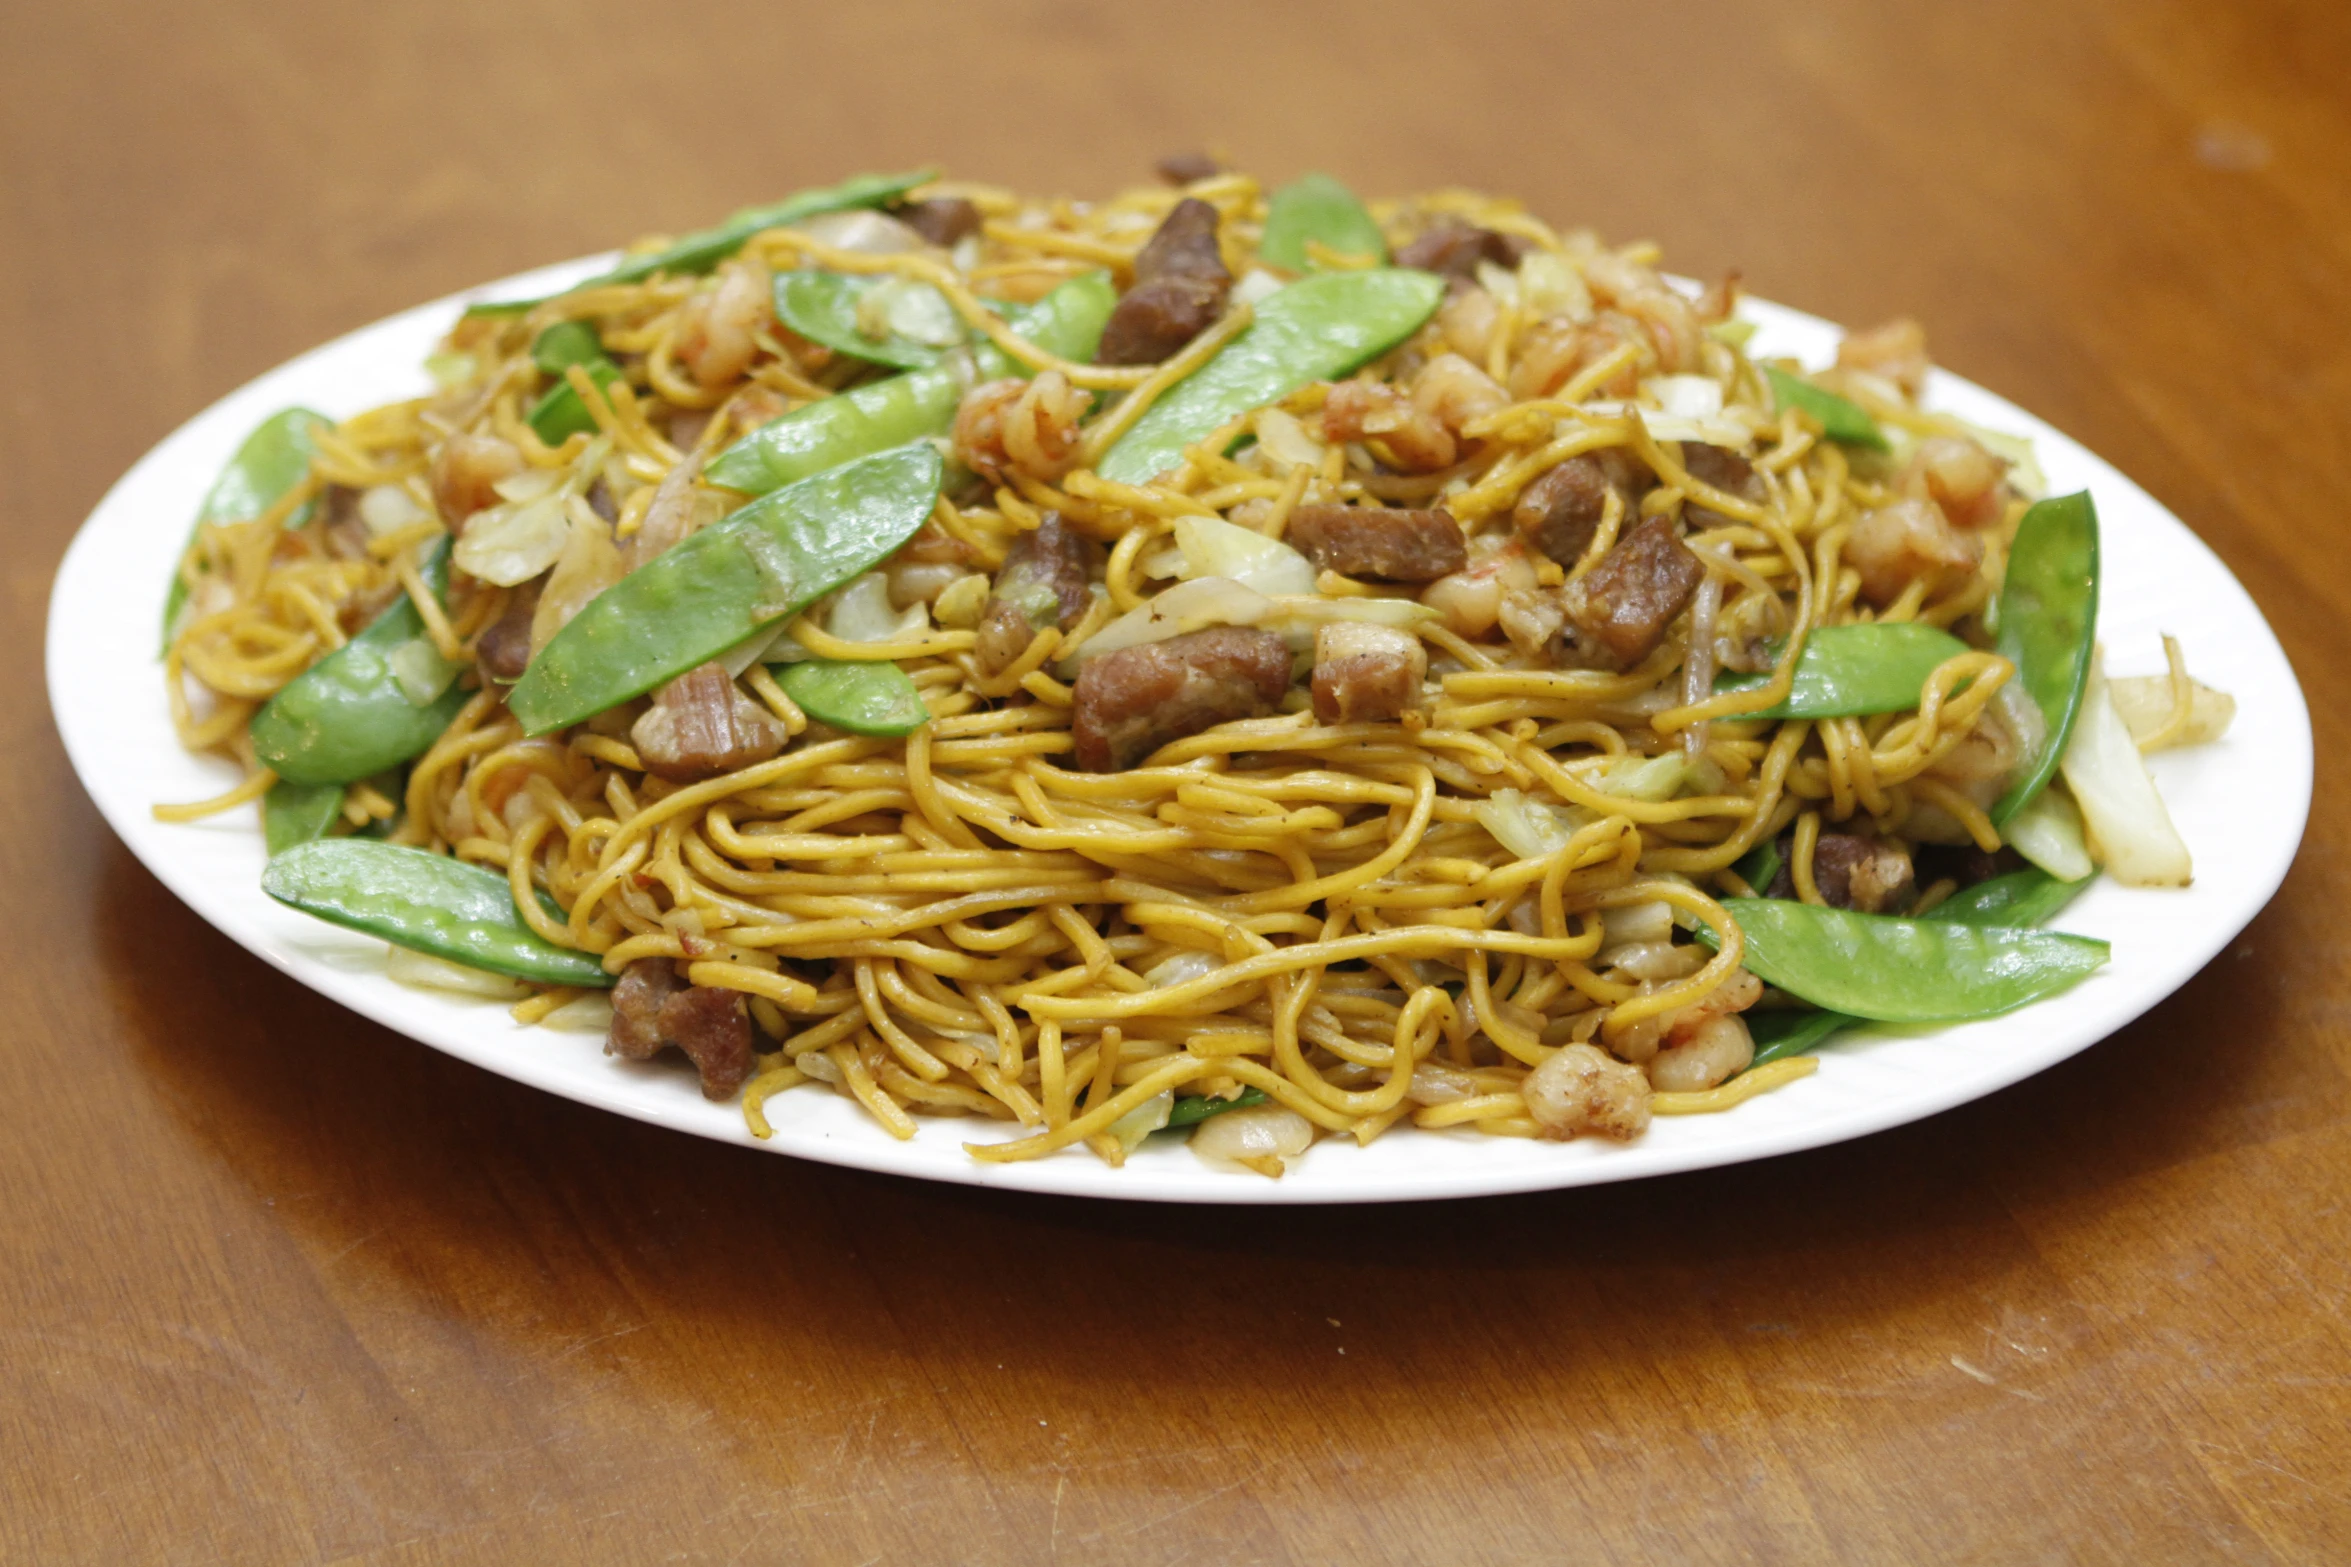 noodles with snap peas and ground meat in the middle